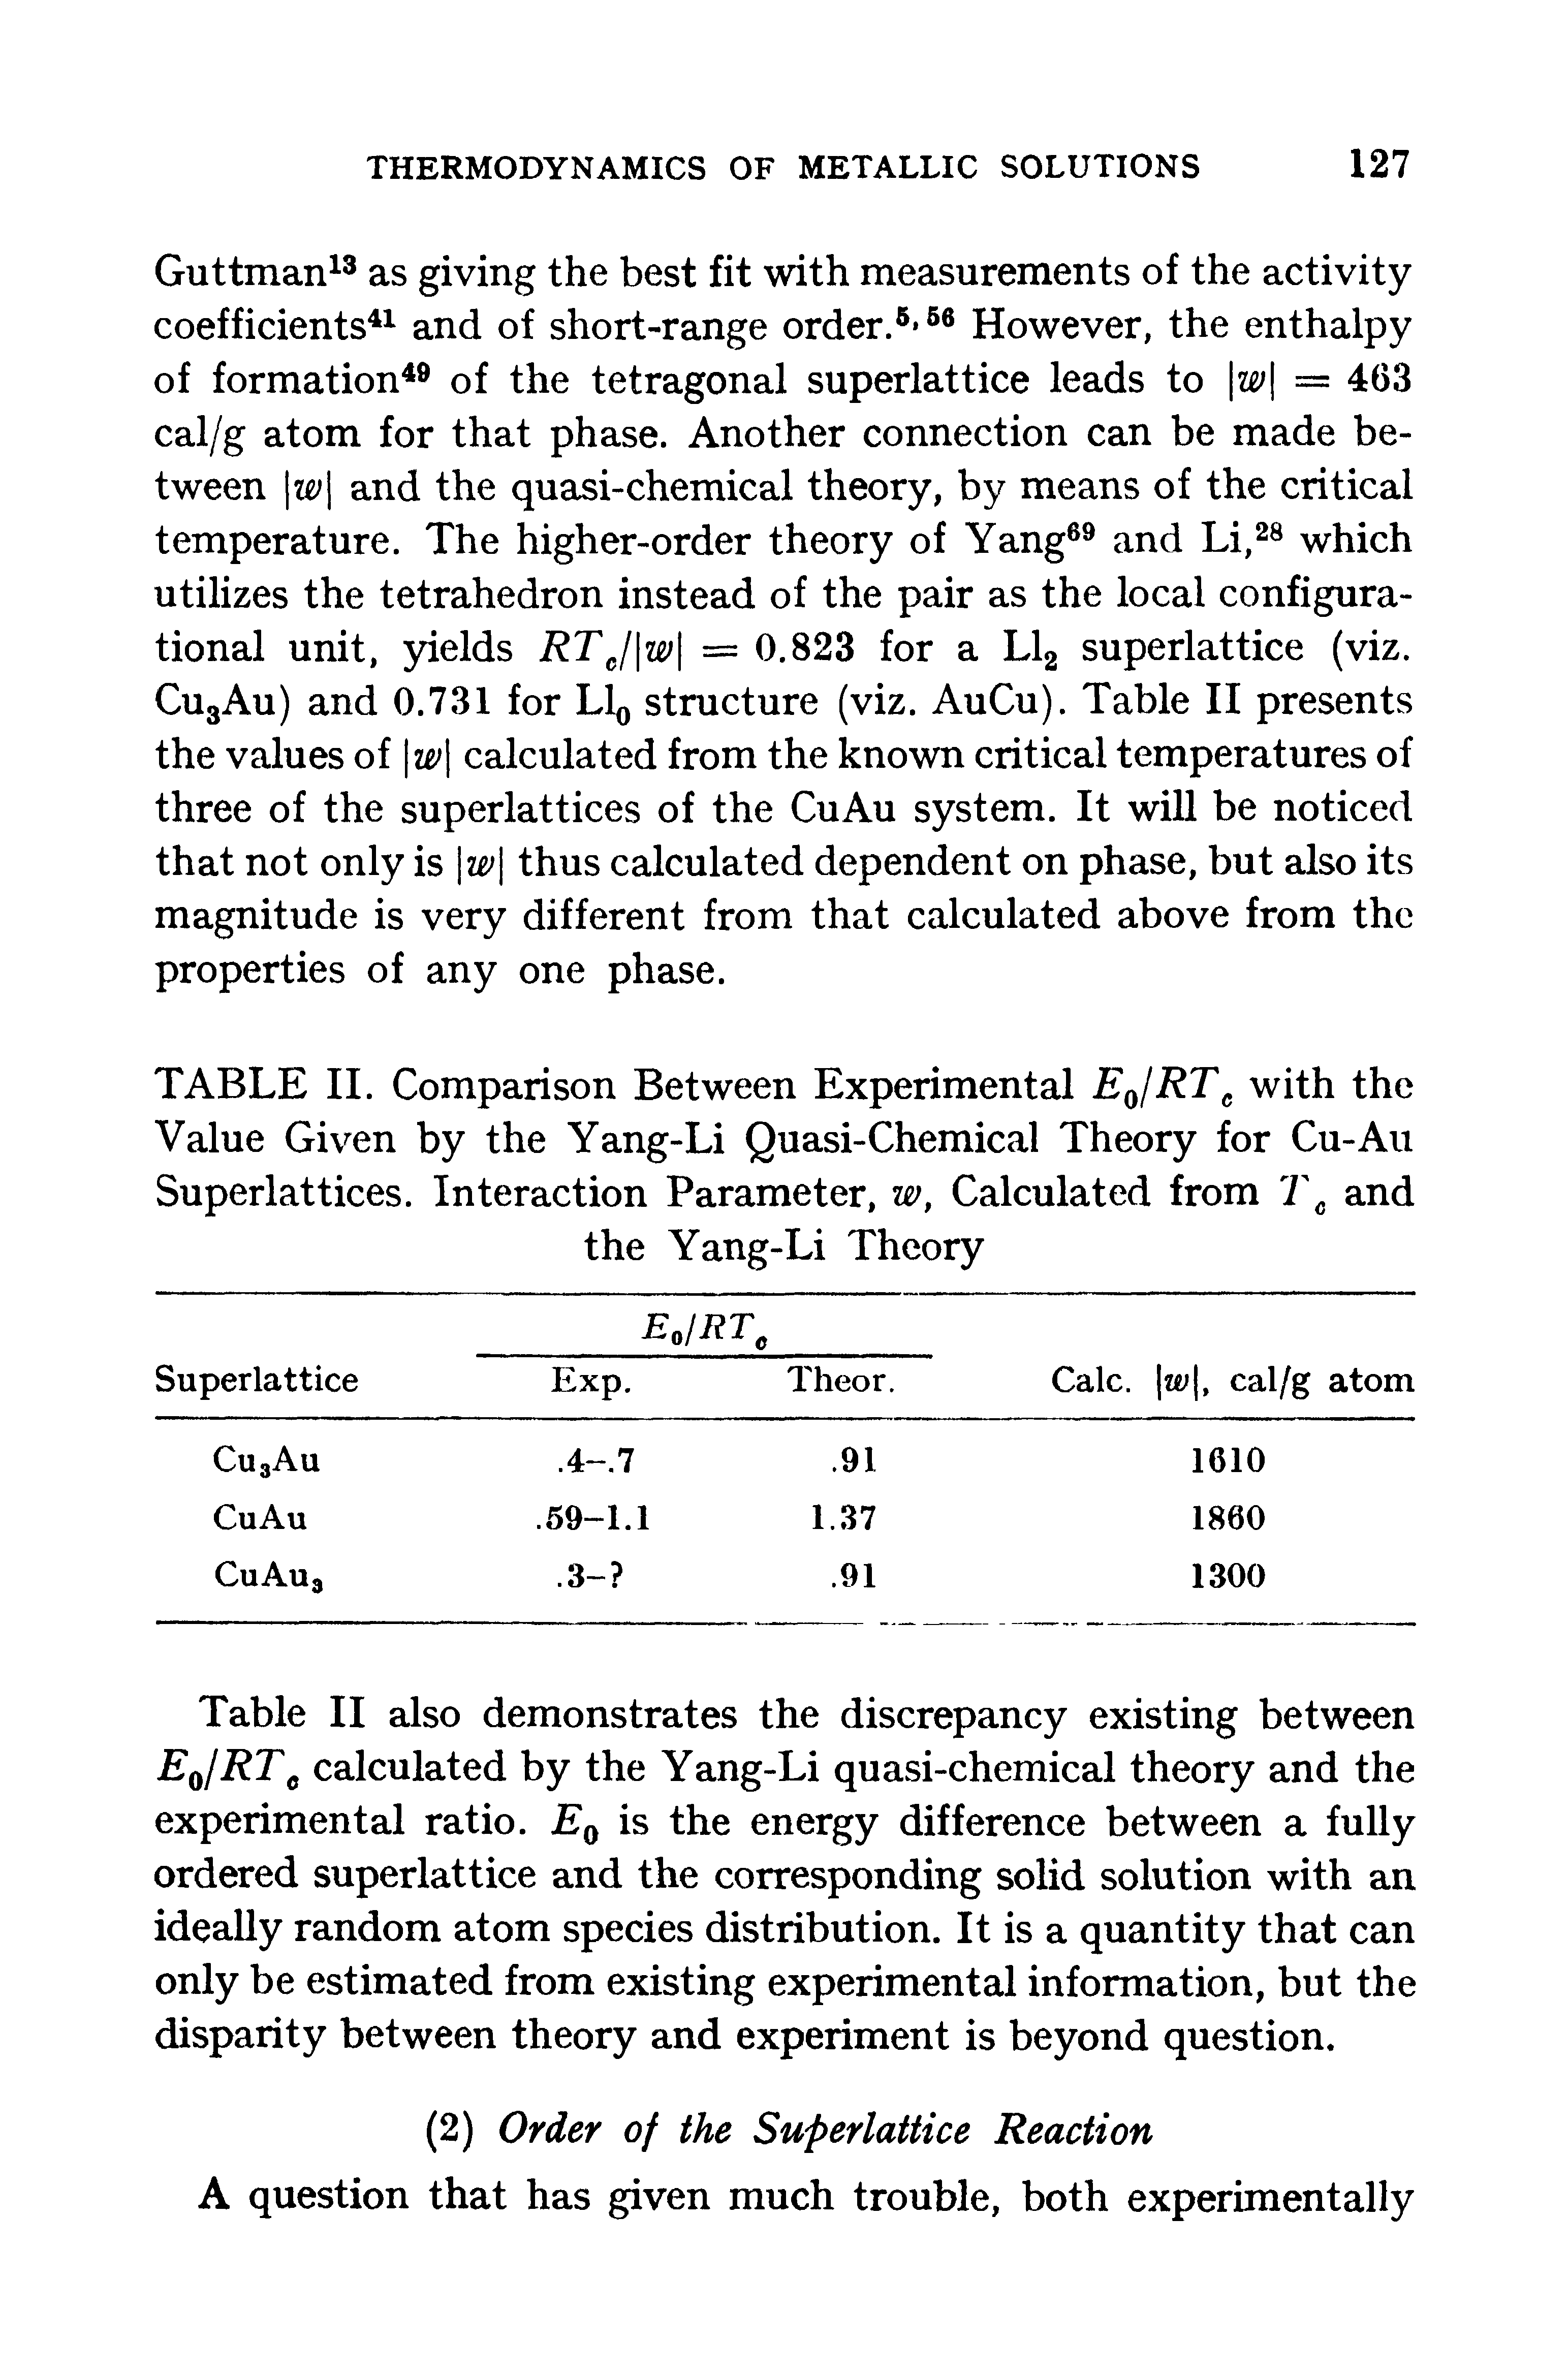 Table II also demonstrates the discrepancy existing between E0/RTe calculated by the Yang-Li quasi-chemical theory and the experimental ratio. E0 is the energy difference between a fully ordered superlattice and the corresponding solid solution with an ideally random atom species distribution. It is a quantity that can only be estimated from existing experimental information, but the disparity between theory and experiment is beyond question.